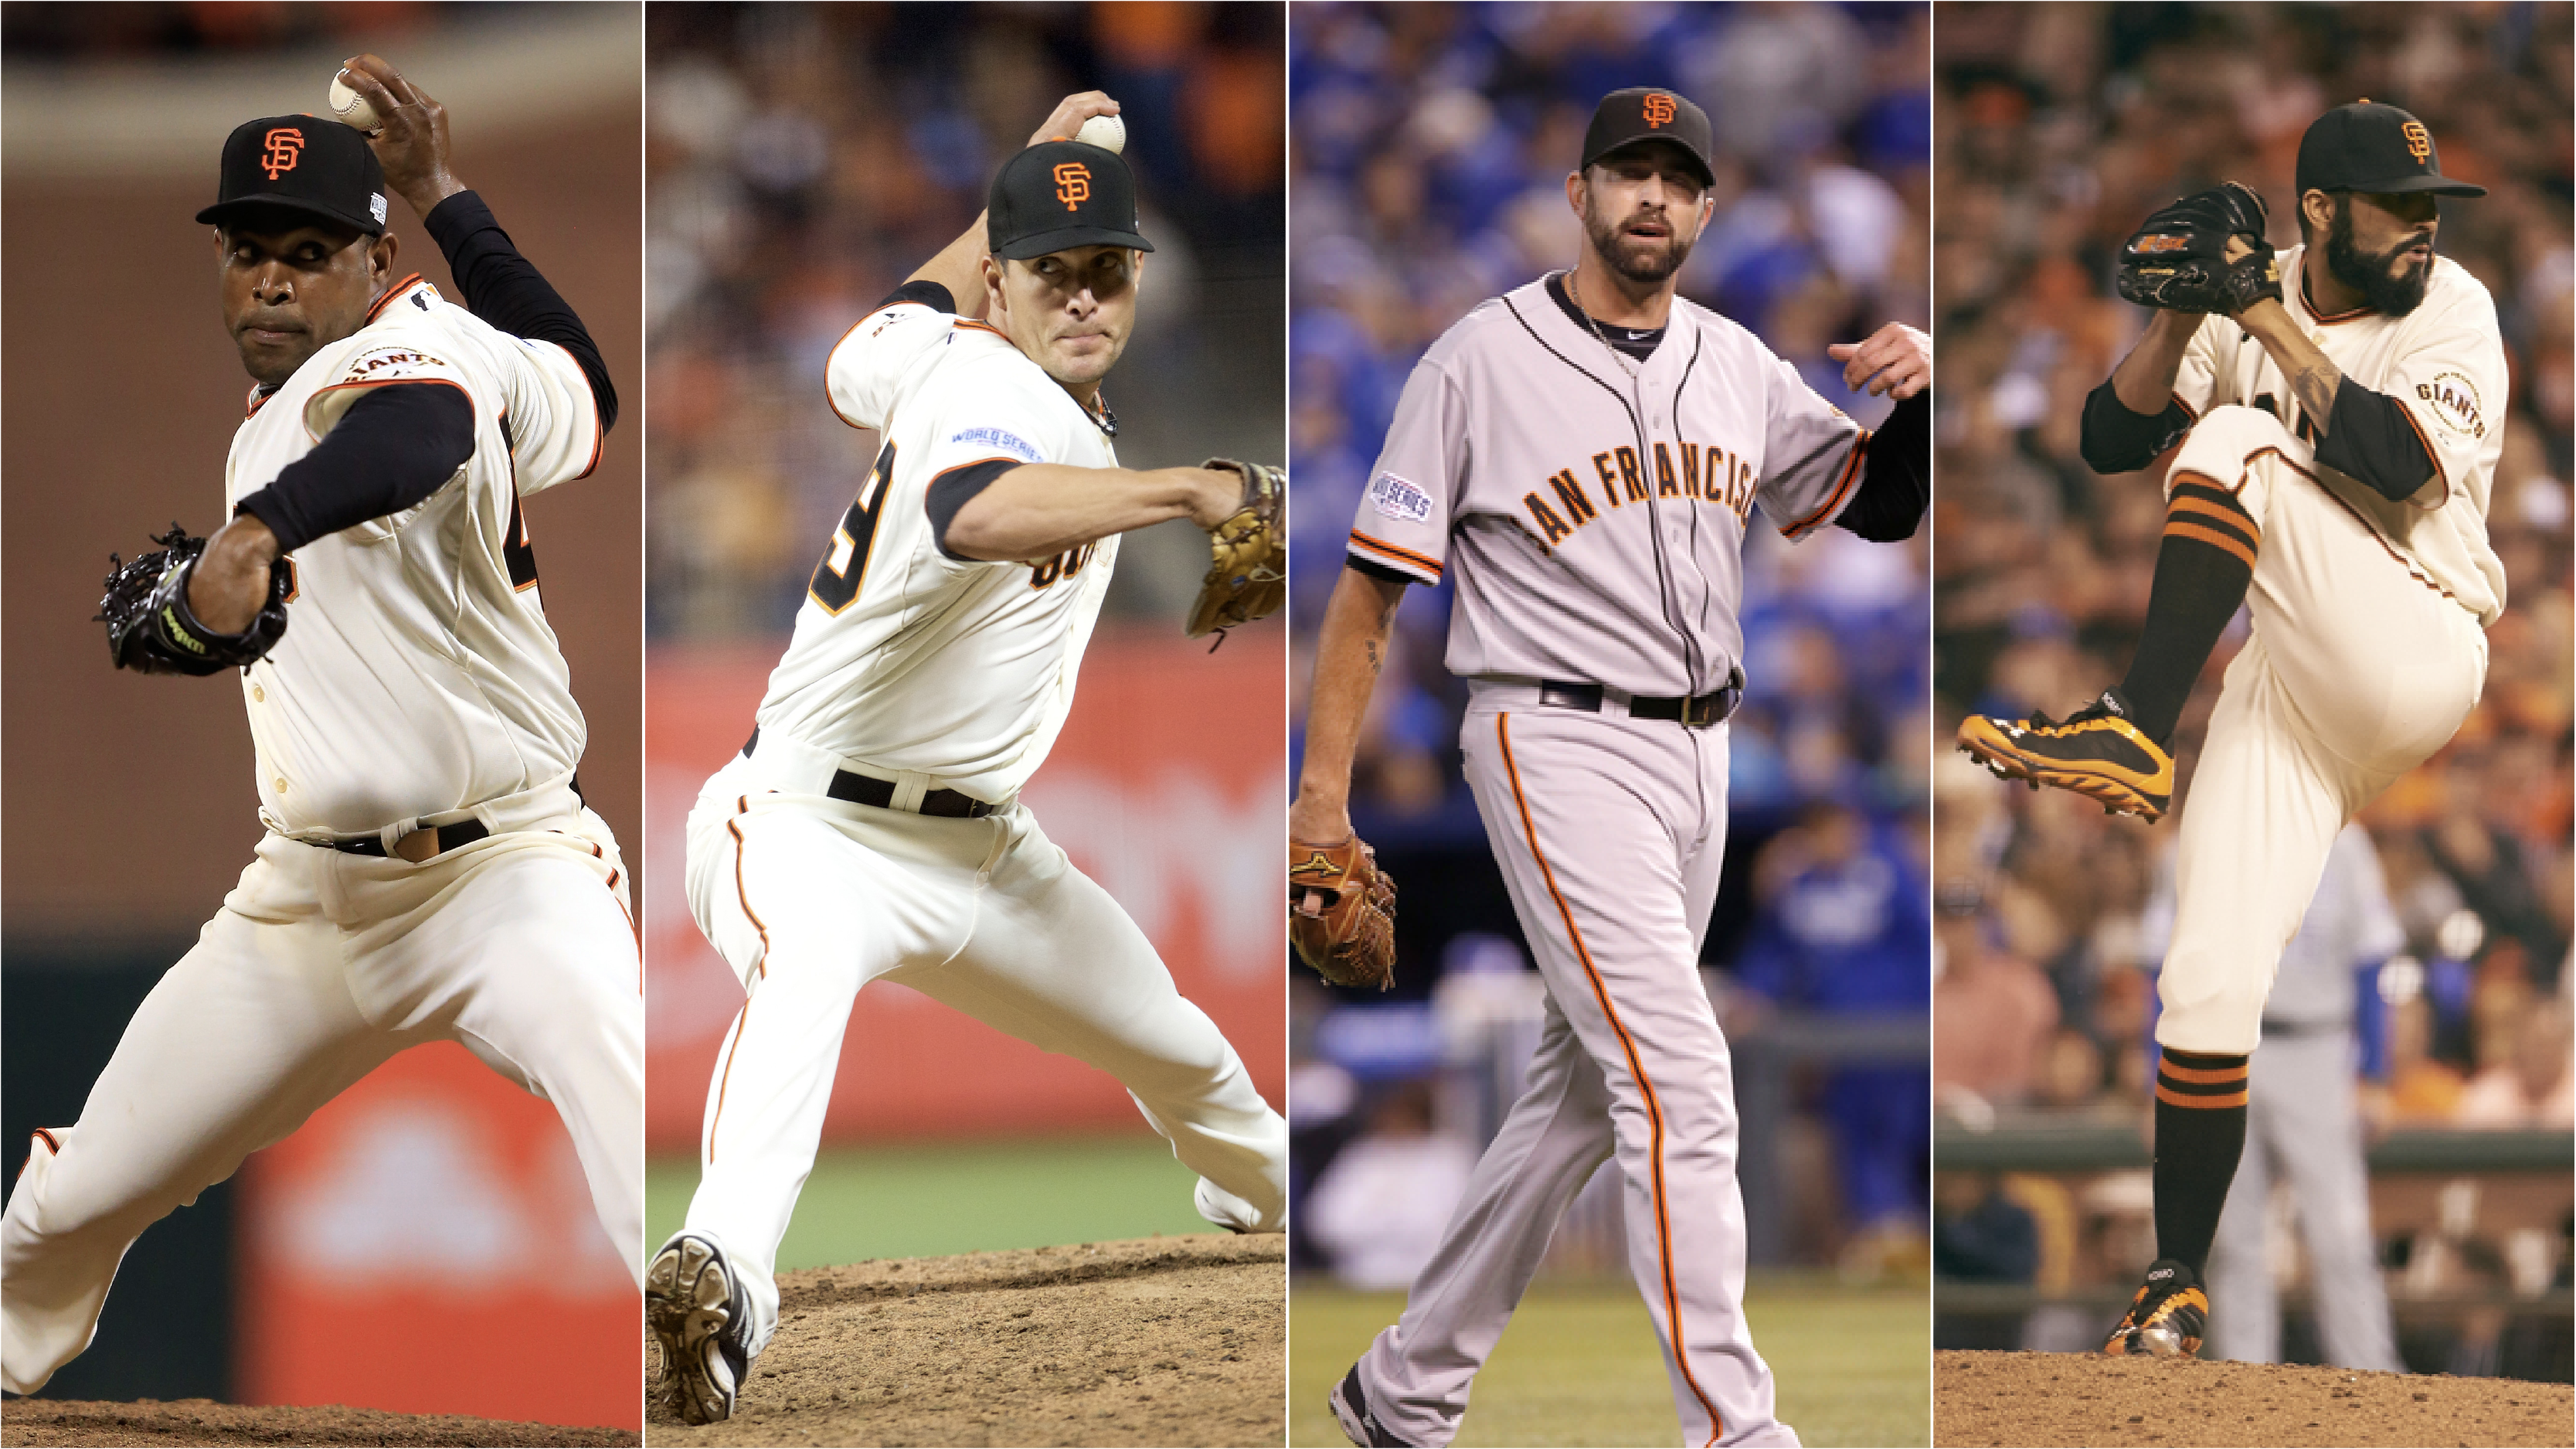 Giants' ‘Core Four' set to be enshrined in Wall of Fame together